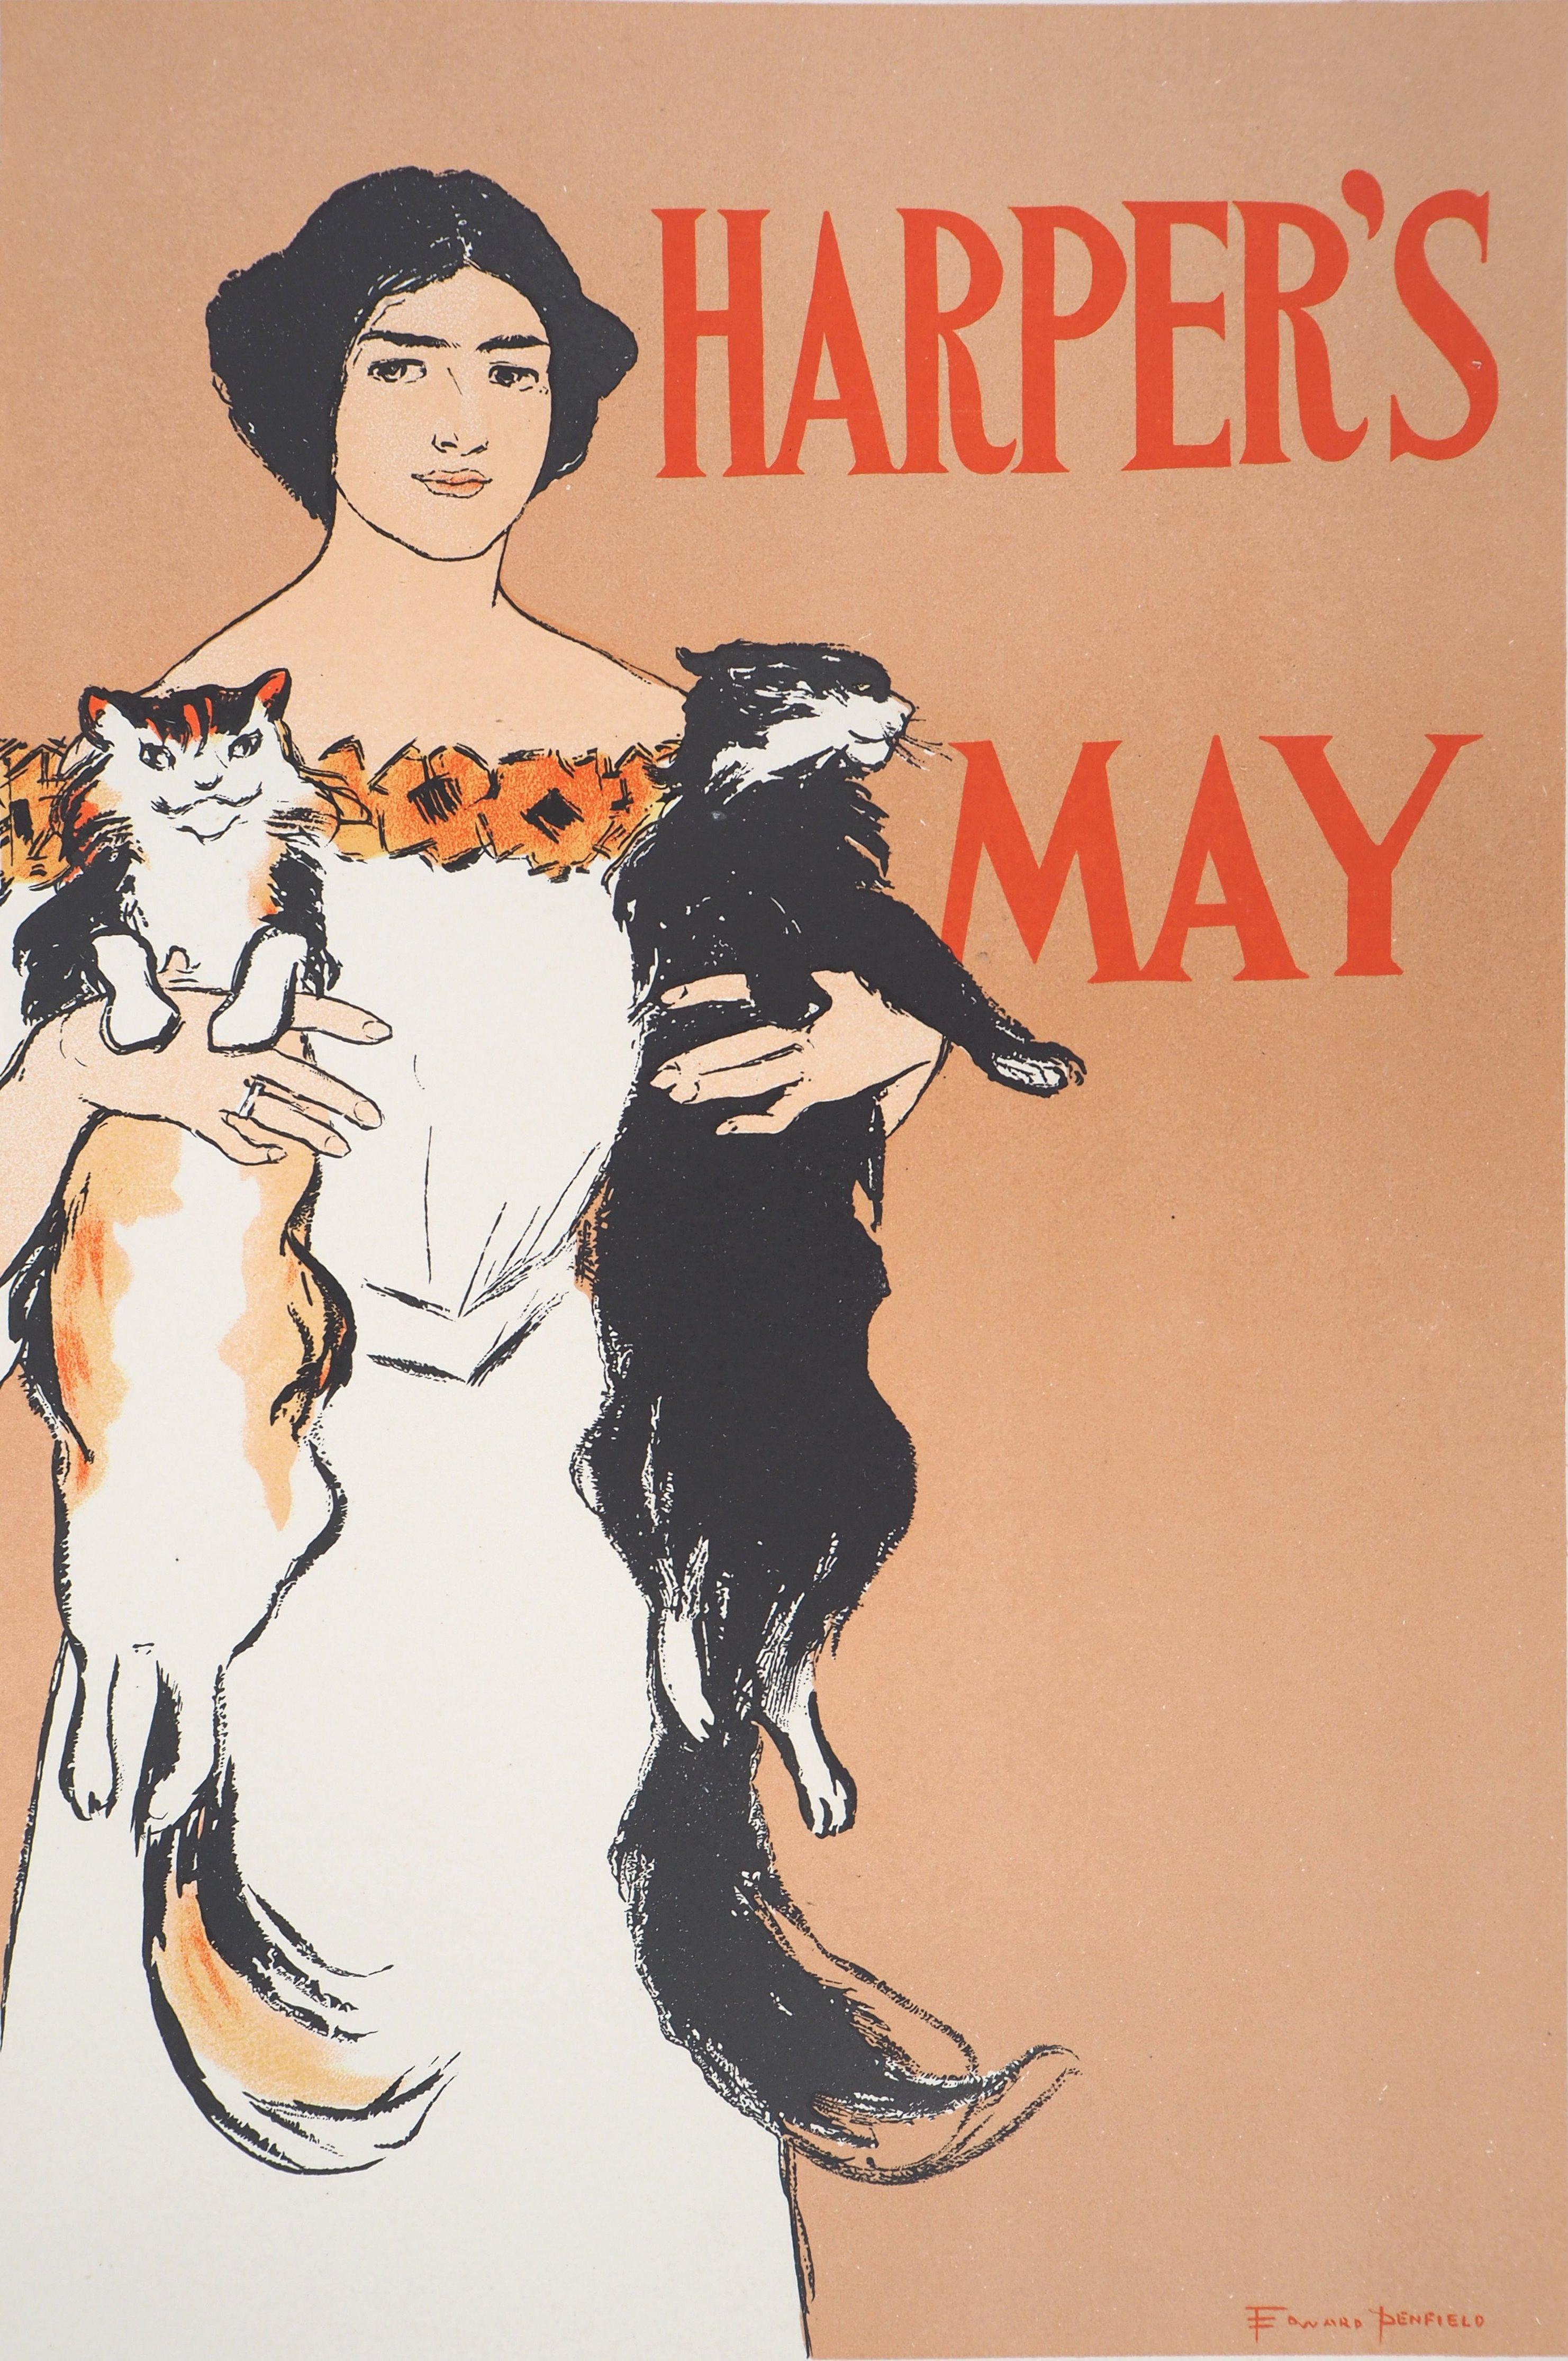 Edward Penfield Animal Print - Young Lady and Two Cats (Harper's) - Lithograph (Les Maîtres de l'Affiche), 1897